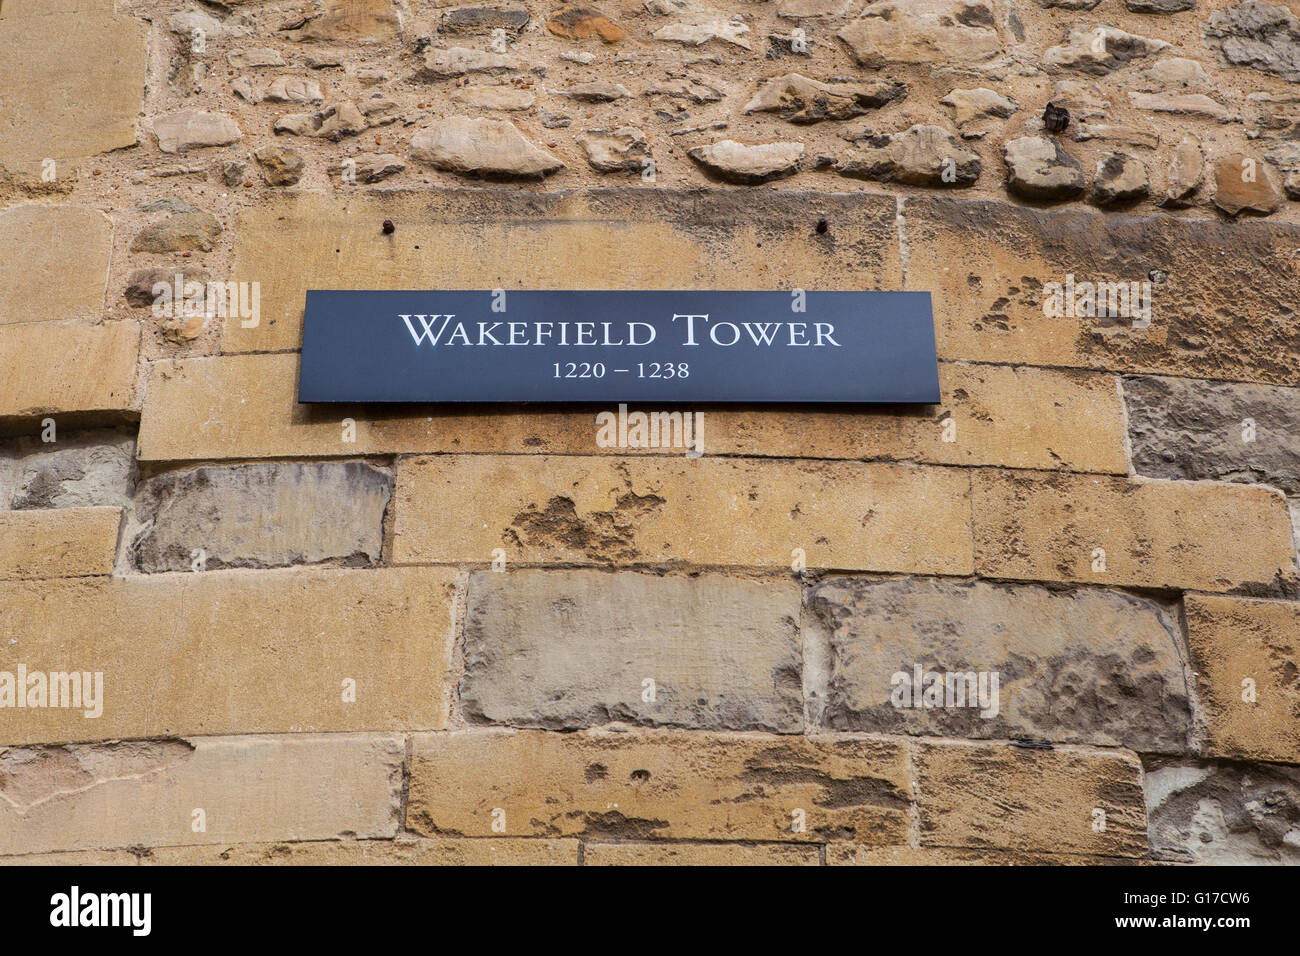 A view of the Wakefield Tower at the Tower of London.  A total of 21 towers make up the historic Tower of London fortification. Stock Photo